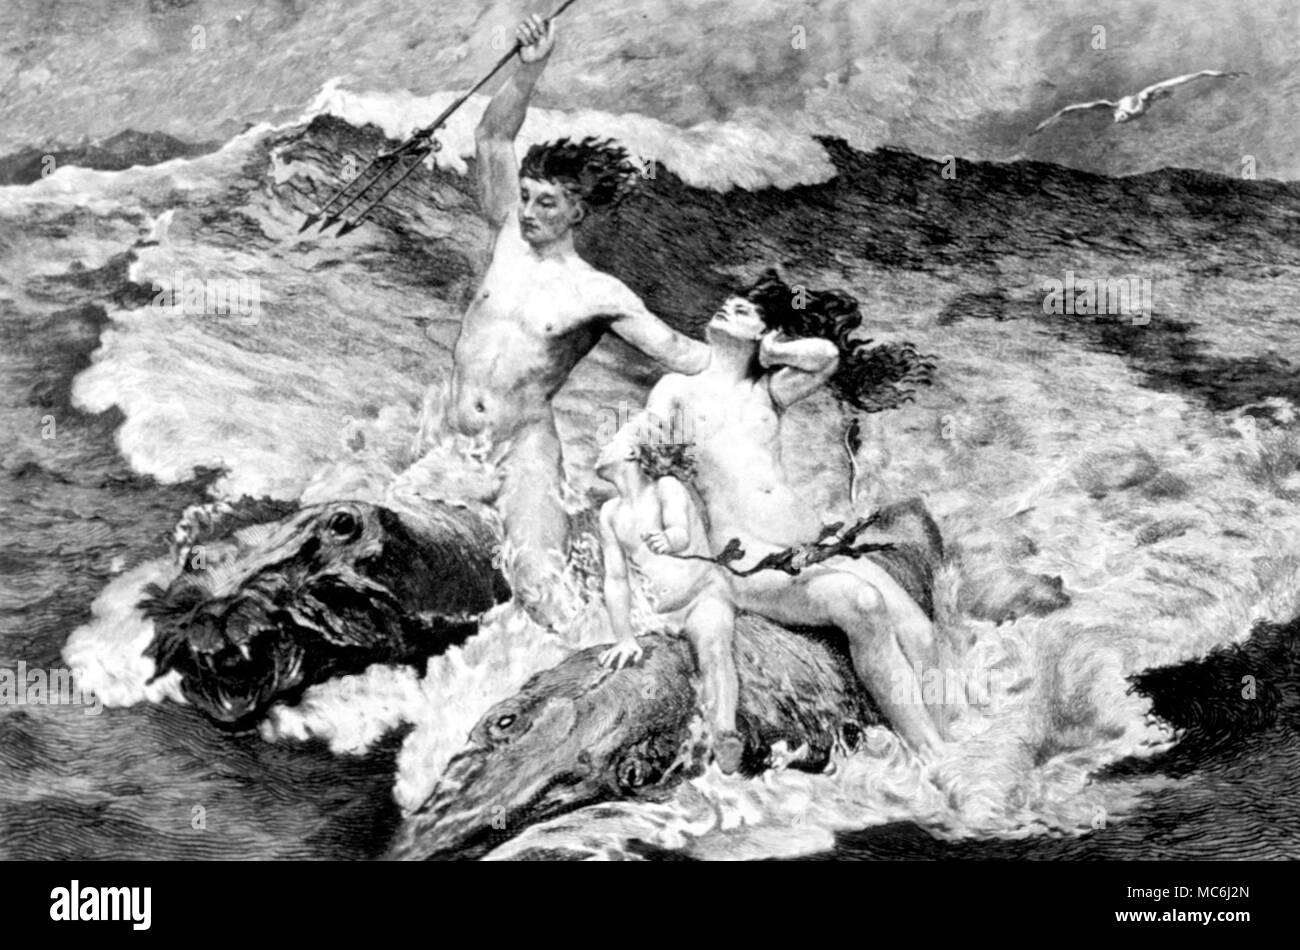 Greek Mythology Neptune Neptune with his trident and family riding on strange fish Etching by PA Masse after the painting by CN Kennedy 1890 Stock Photo